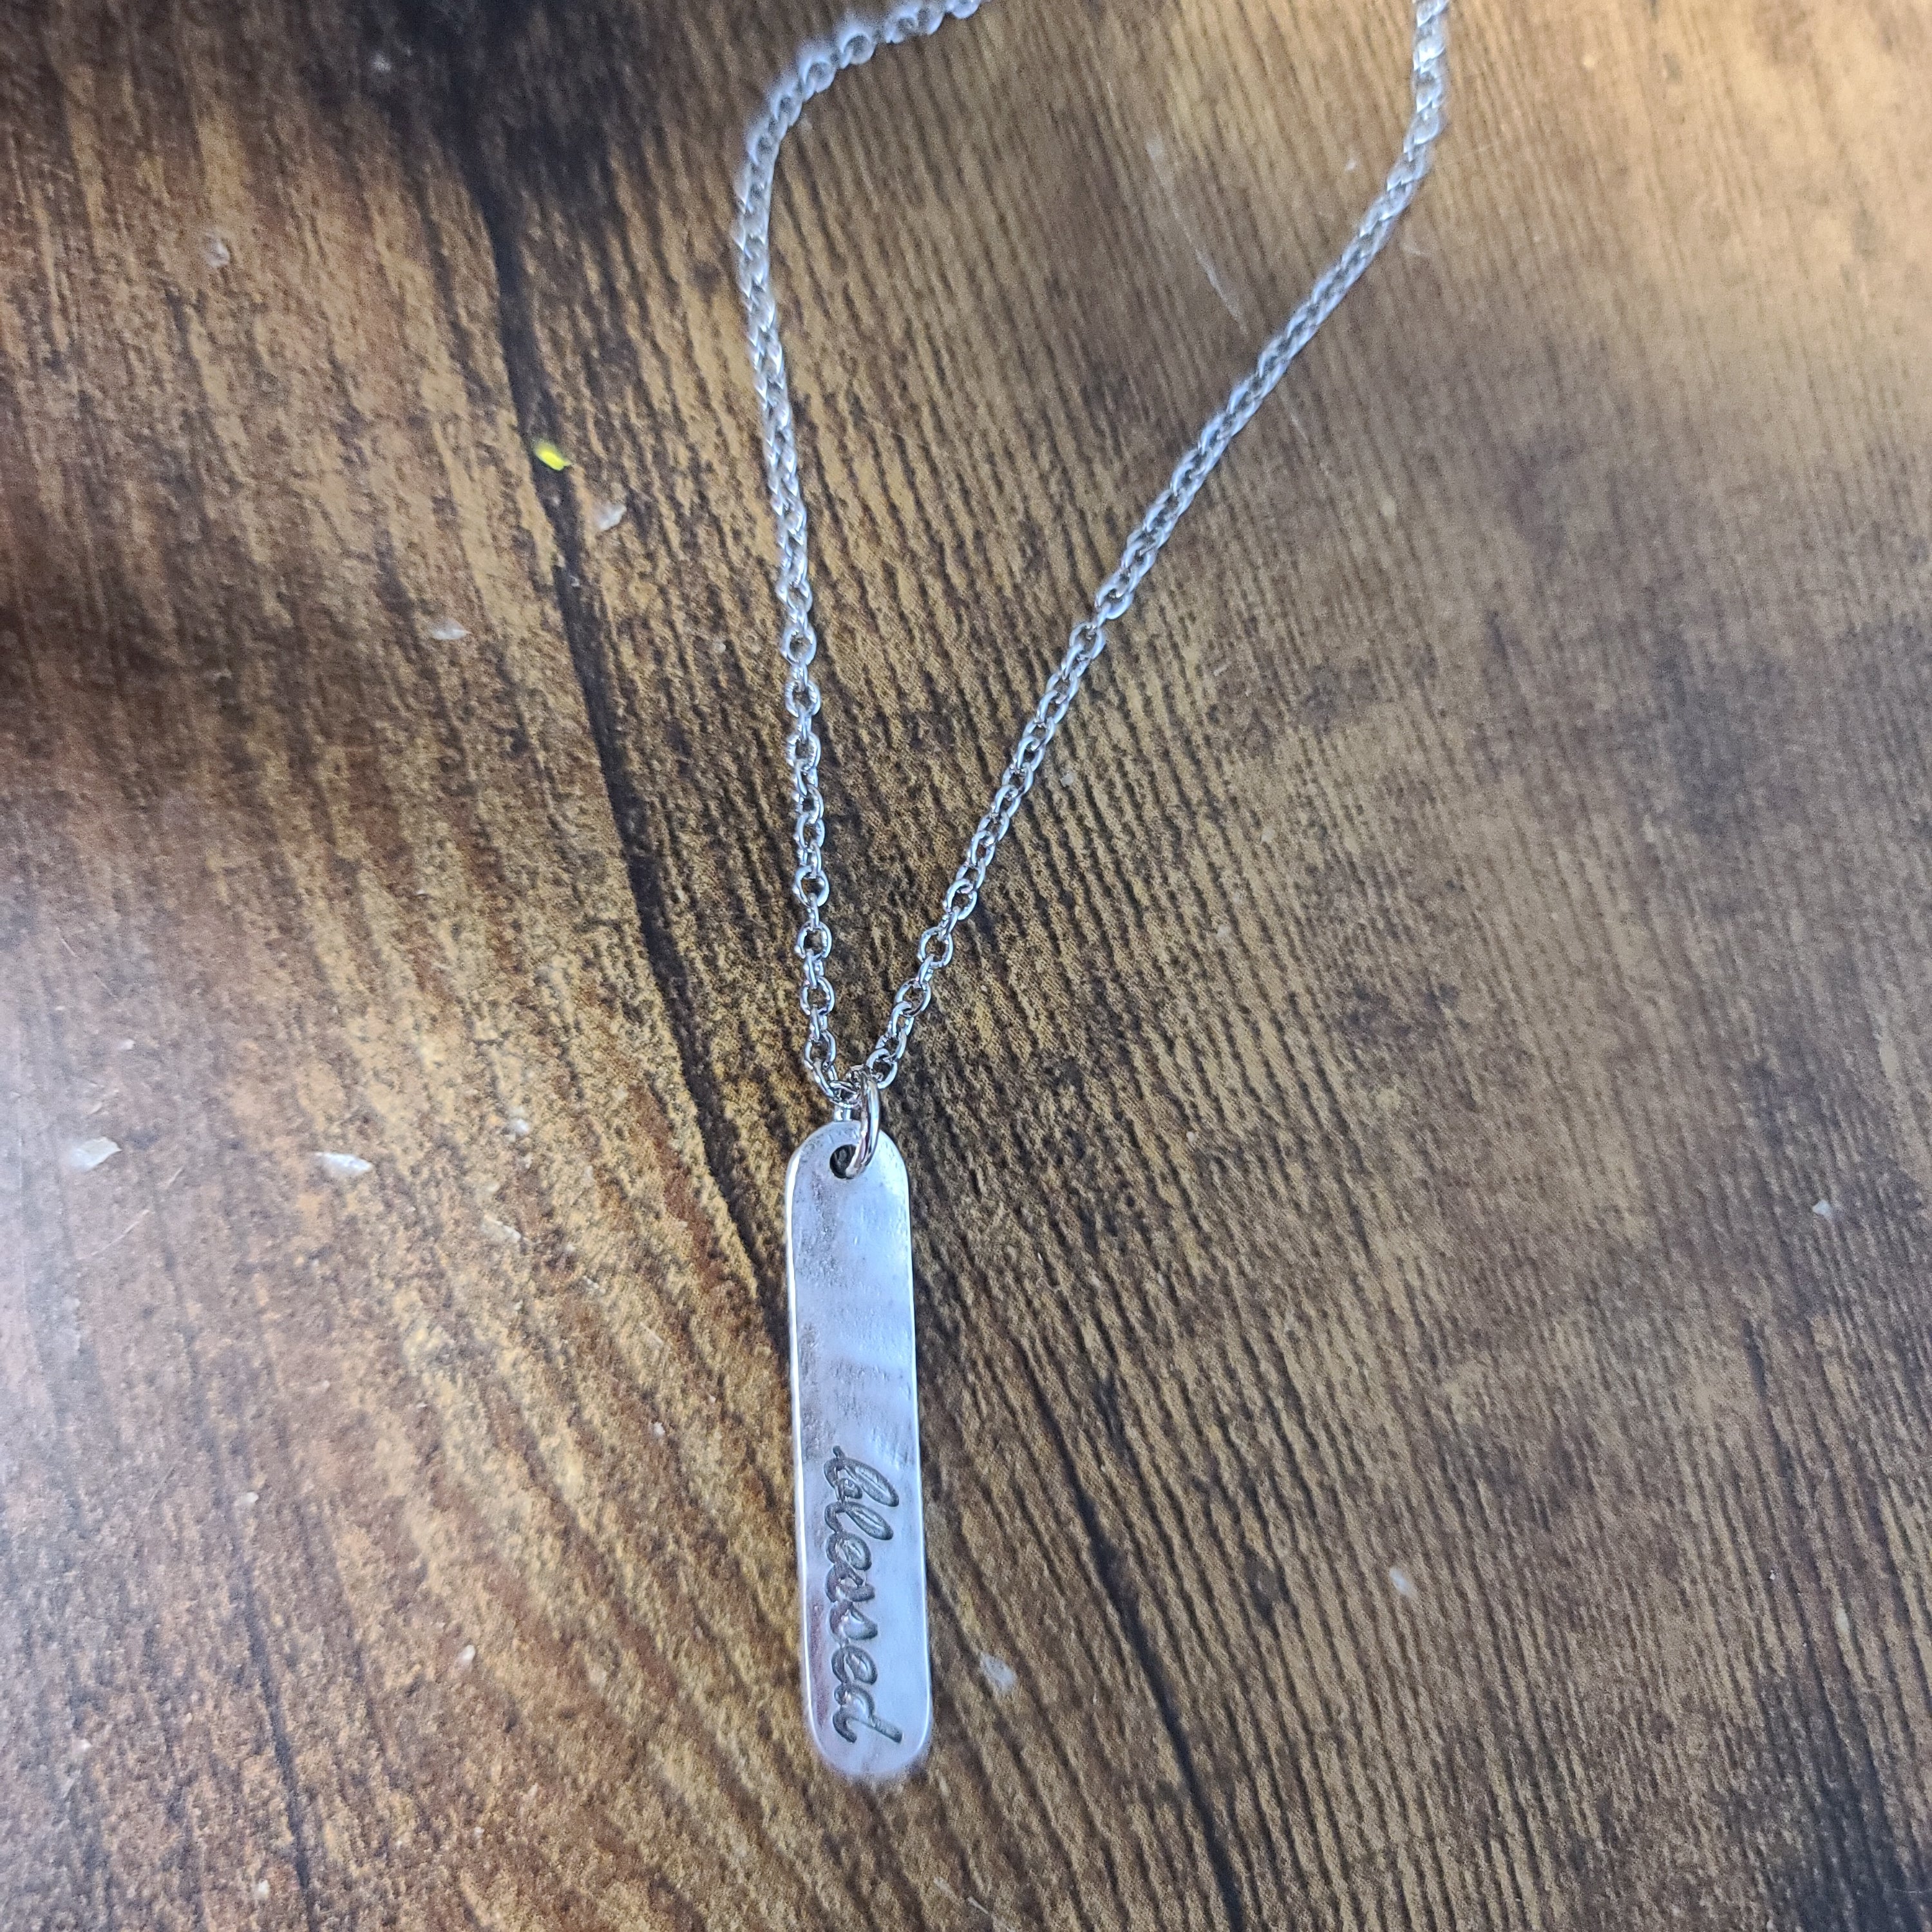 Blessed bar necklace